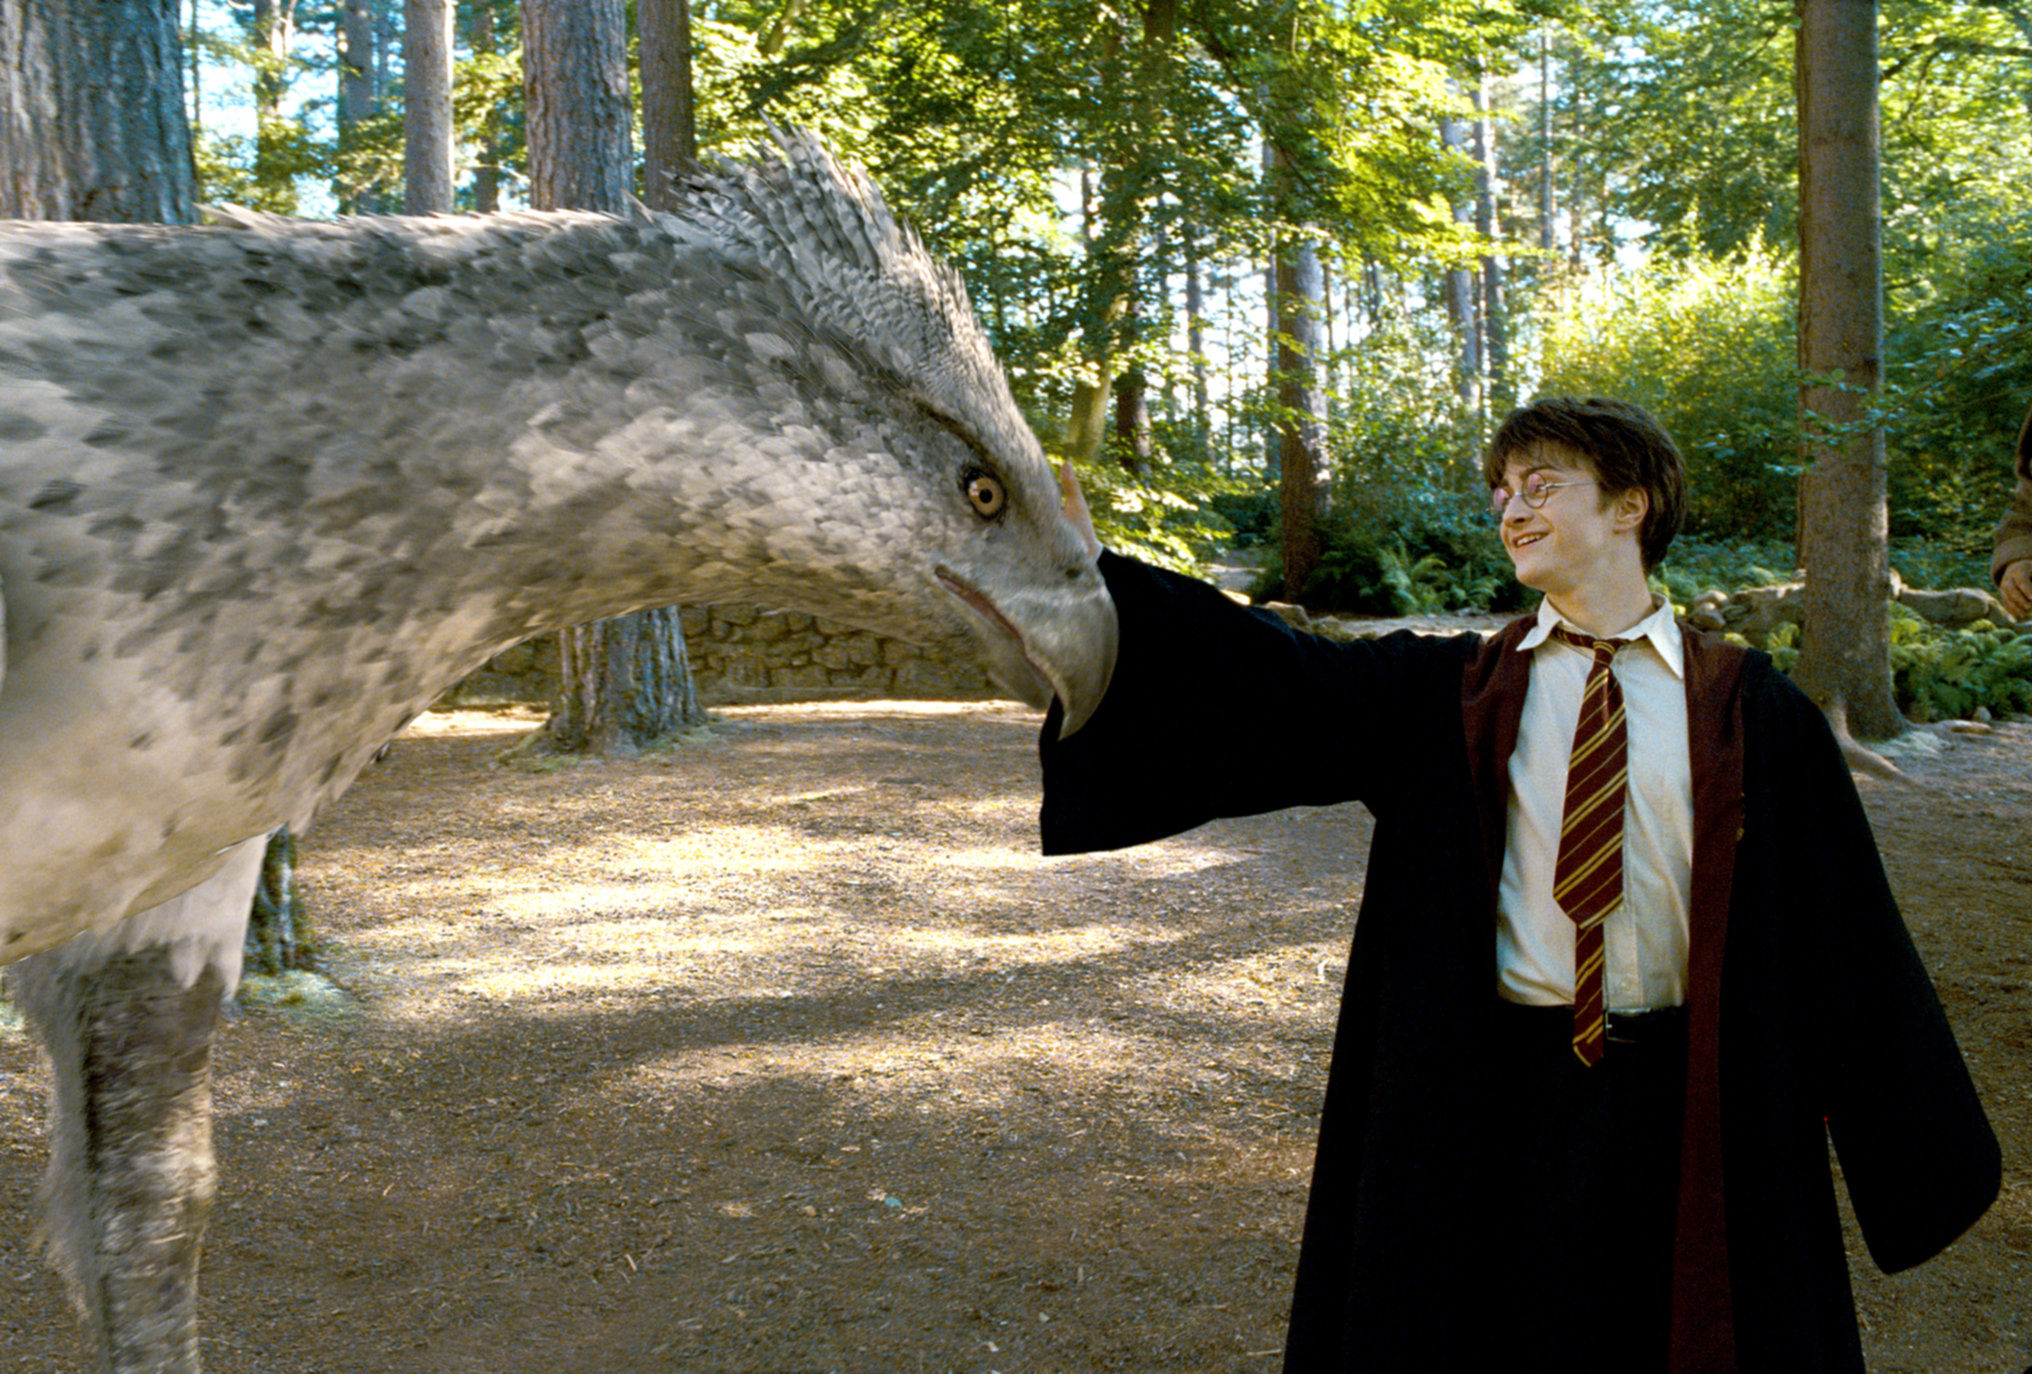 Harry Potter smiles while he pets Buckbeak amidst a sunny forest.